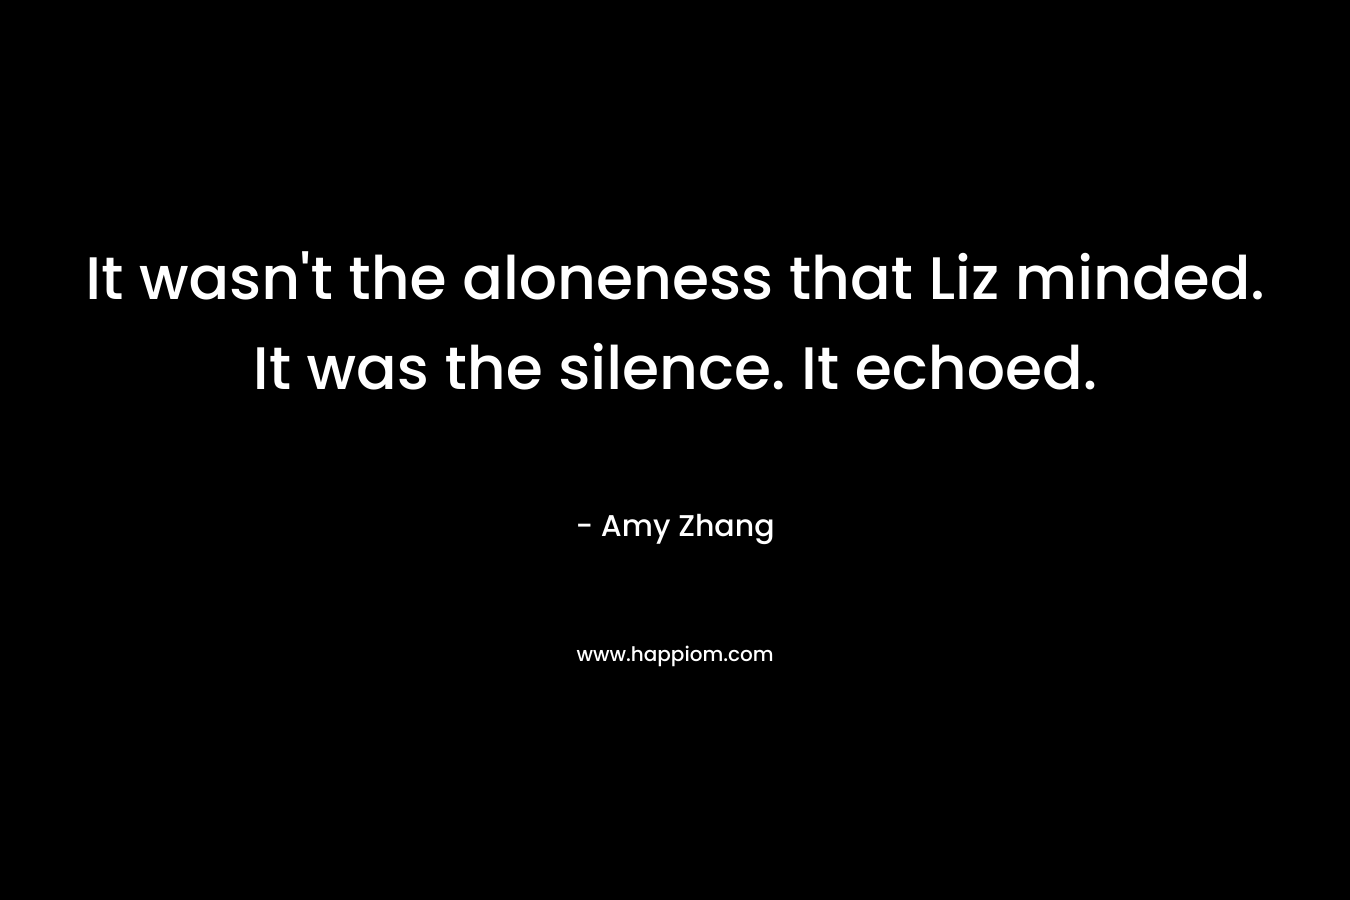 It wasn’t the aloneness that Liz minded. It was the silence. It echoed. – Amy Zhang